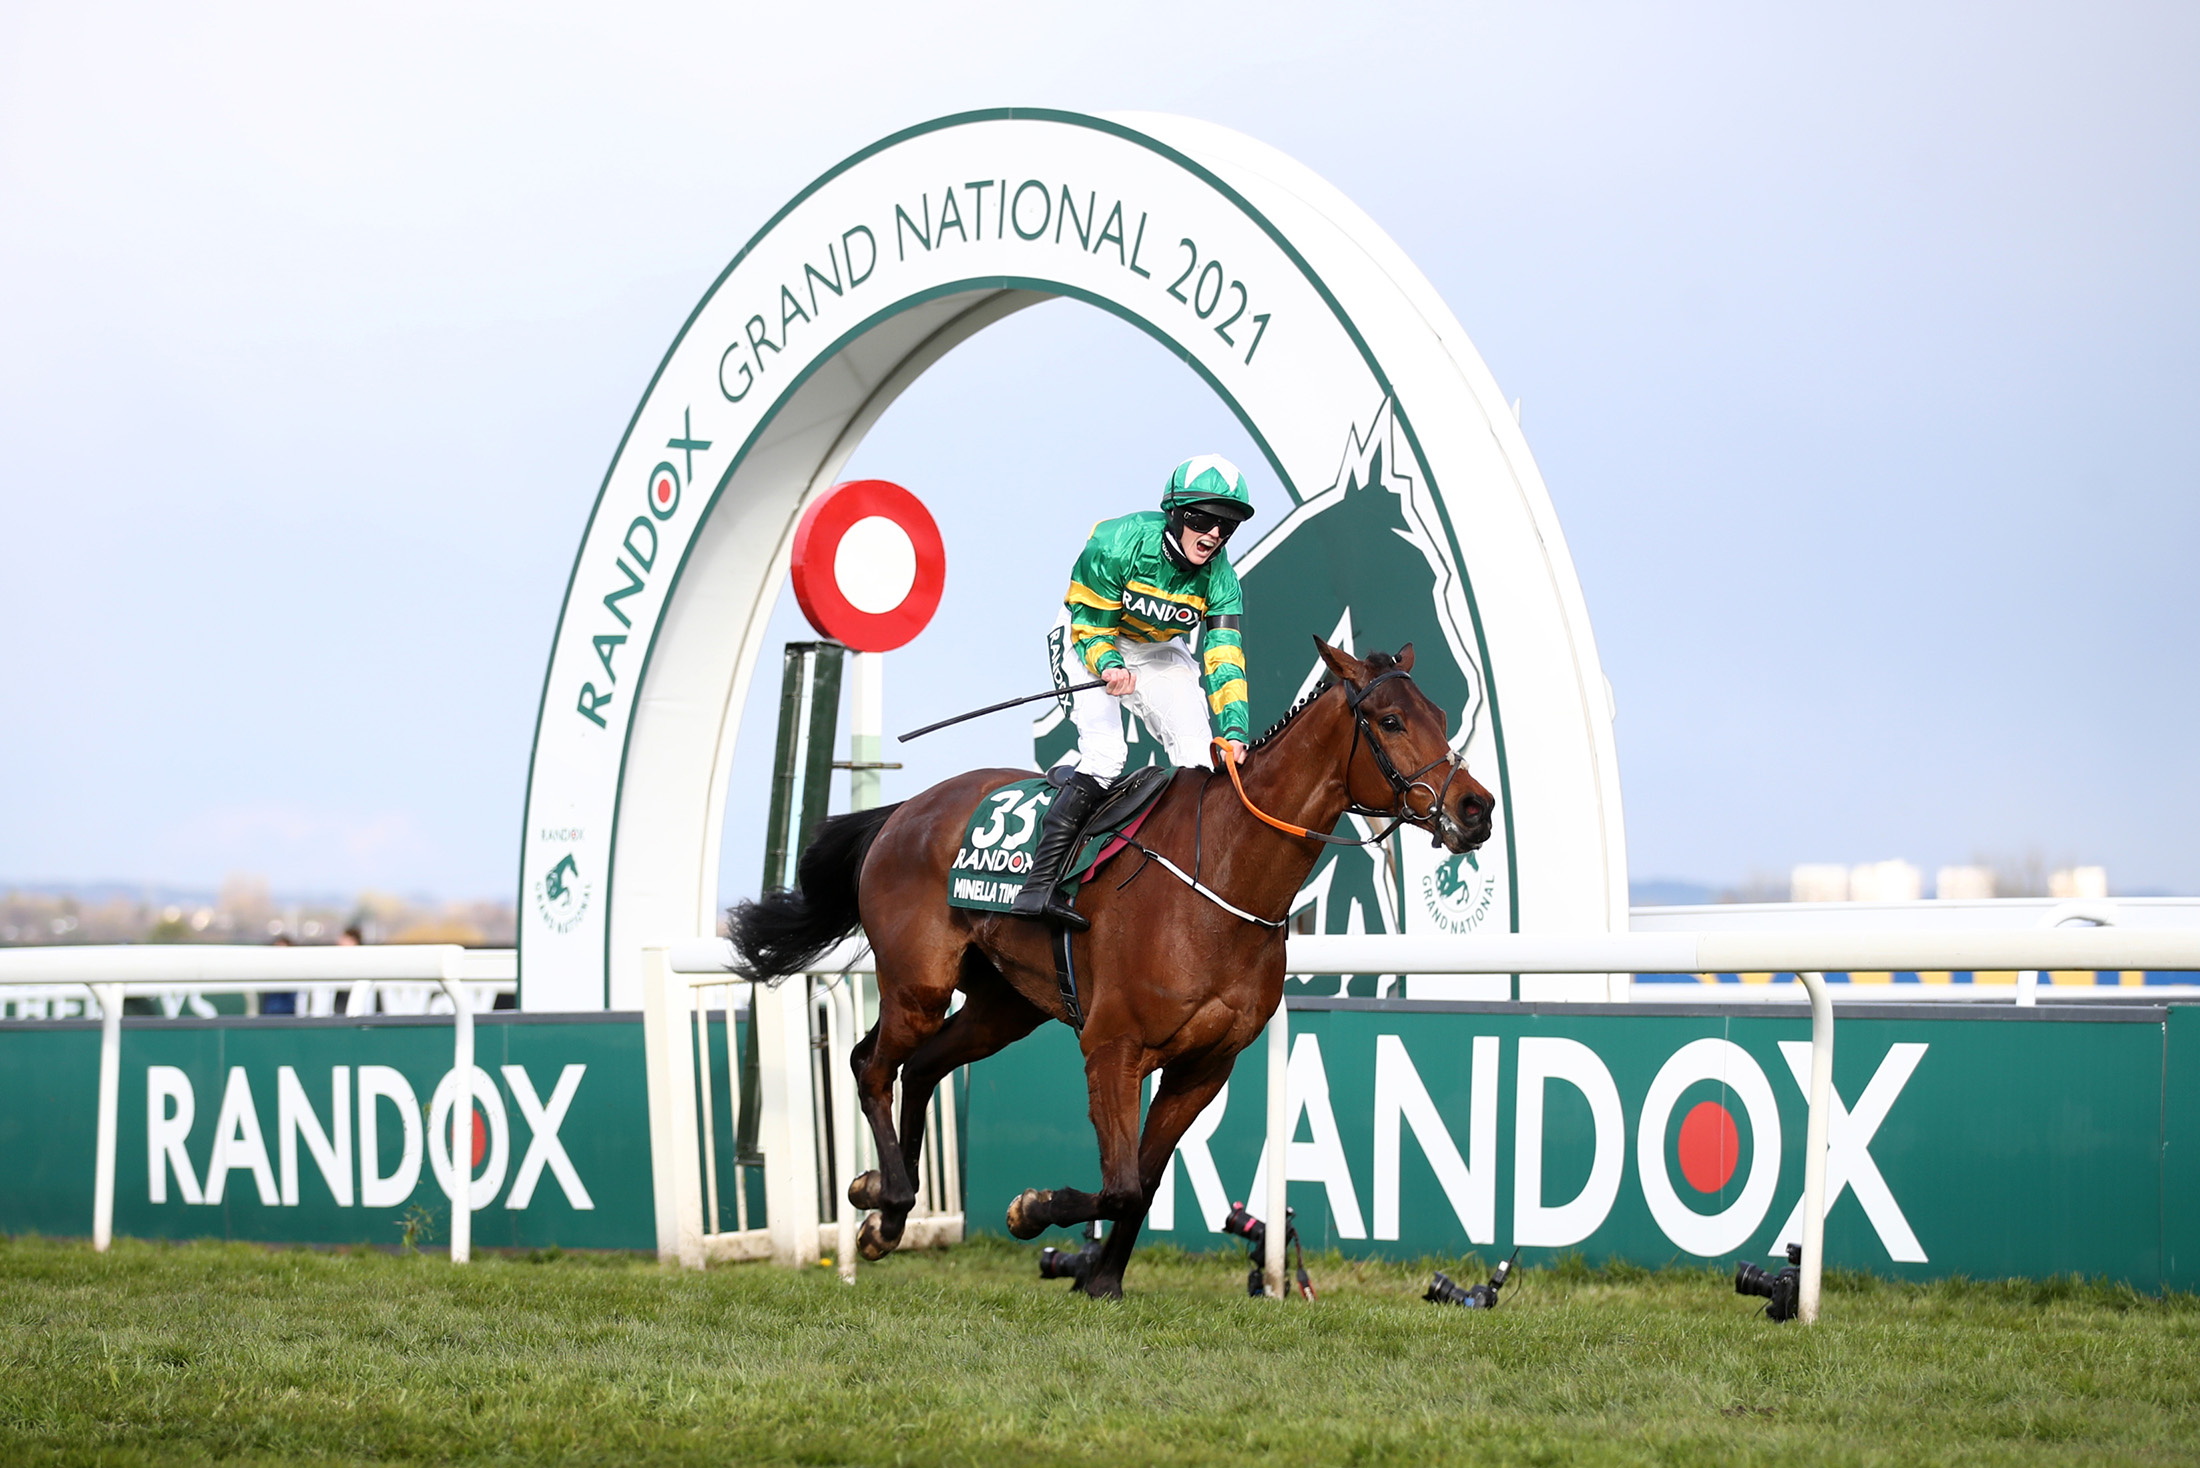 Minella Times ridden by Rachael Blackmore wins the Randox Grand National Handicap Chase on Grand National Day in Liverpool, England on April 10.